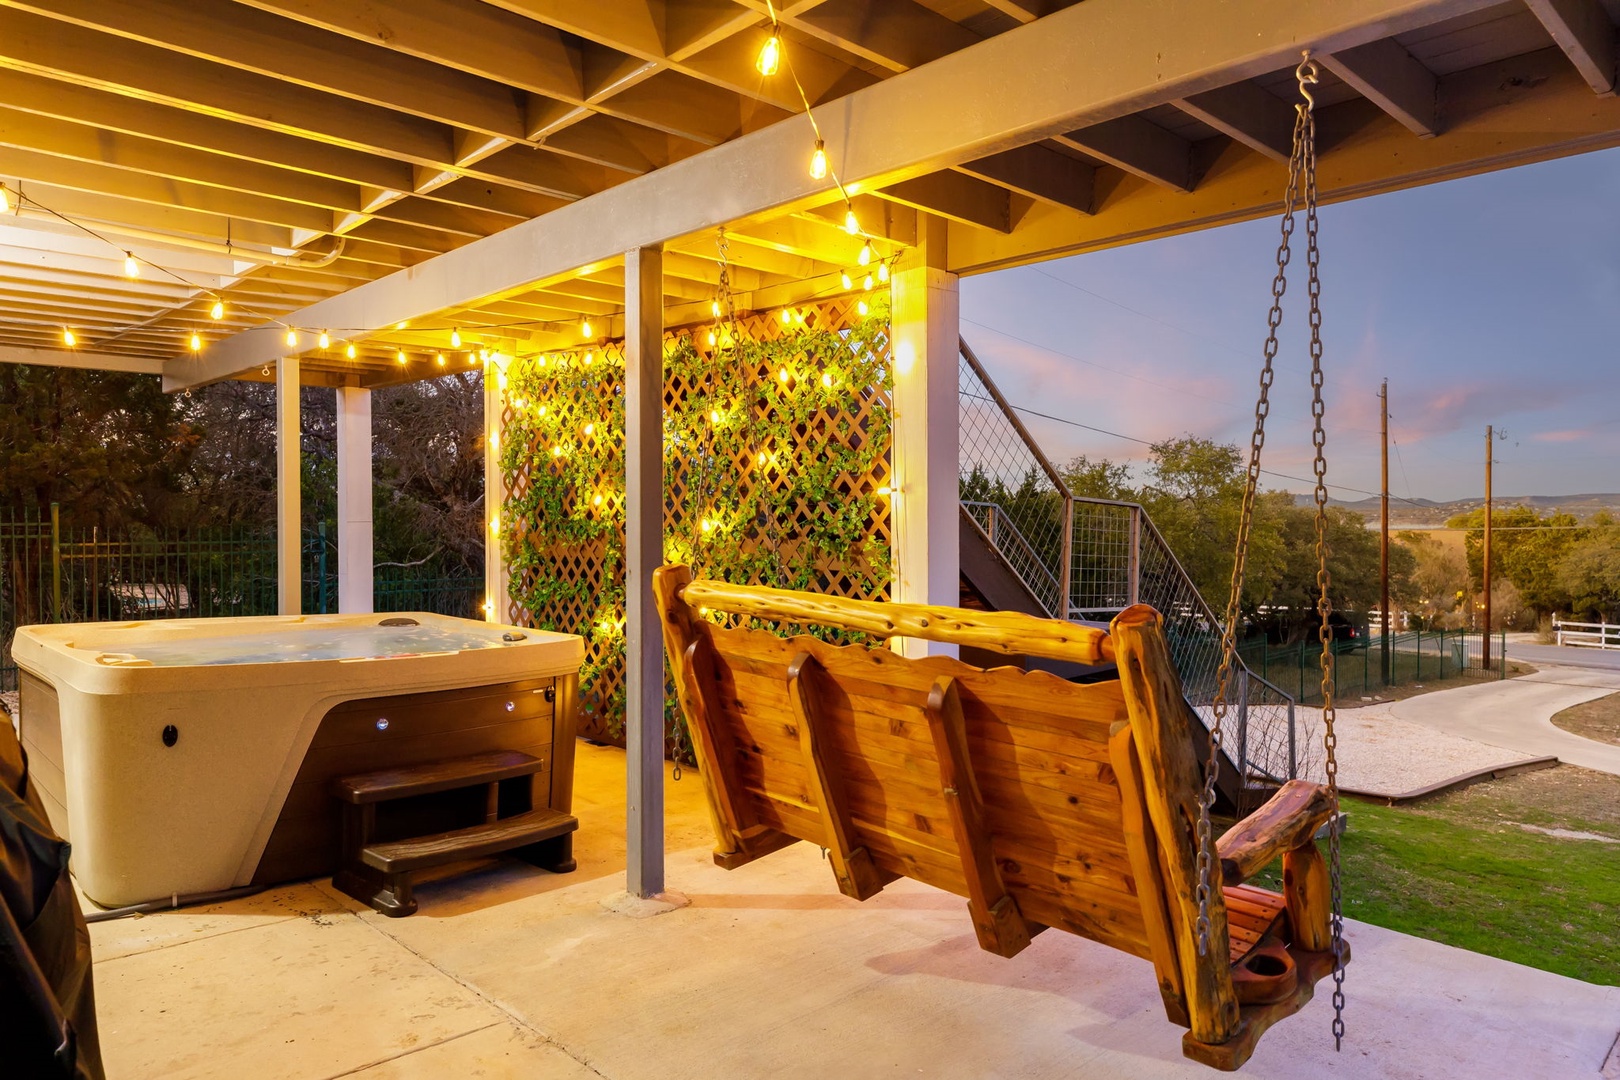 Sway in the fresh air or soak your cares away in the hot tub on the patio